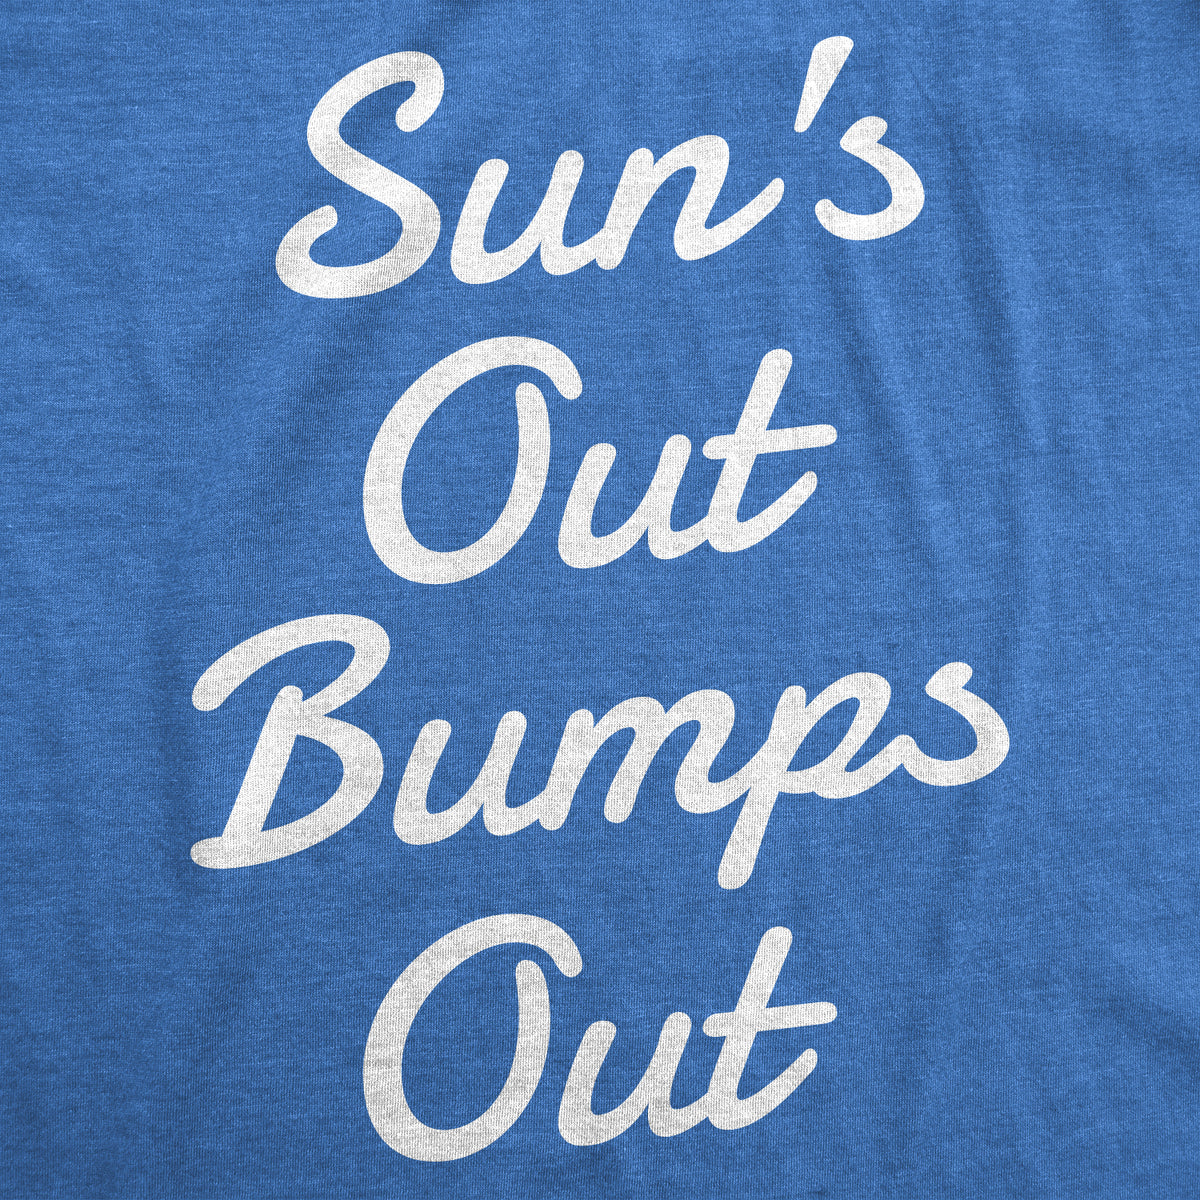 Suns Out Bumps Out Maternity Tshirt